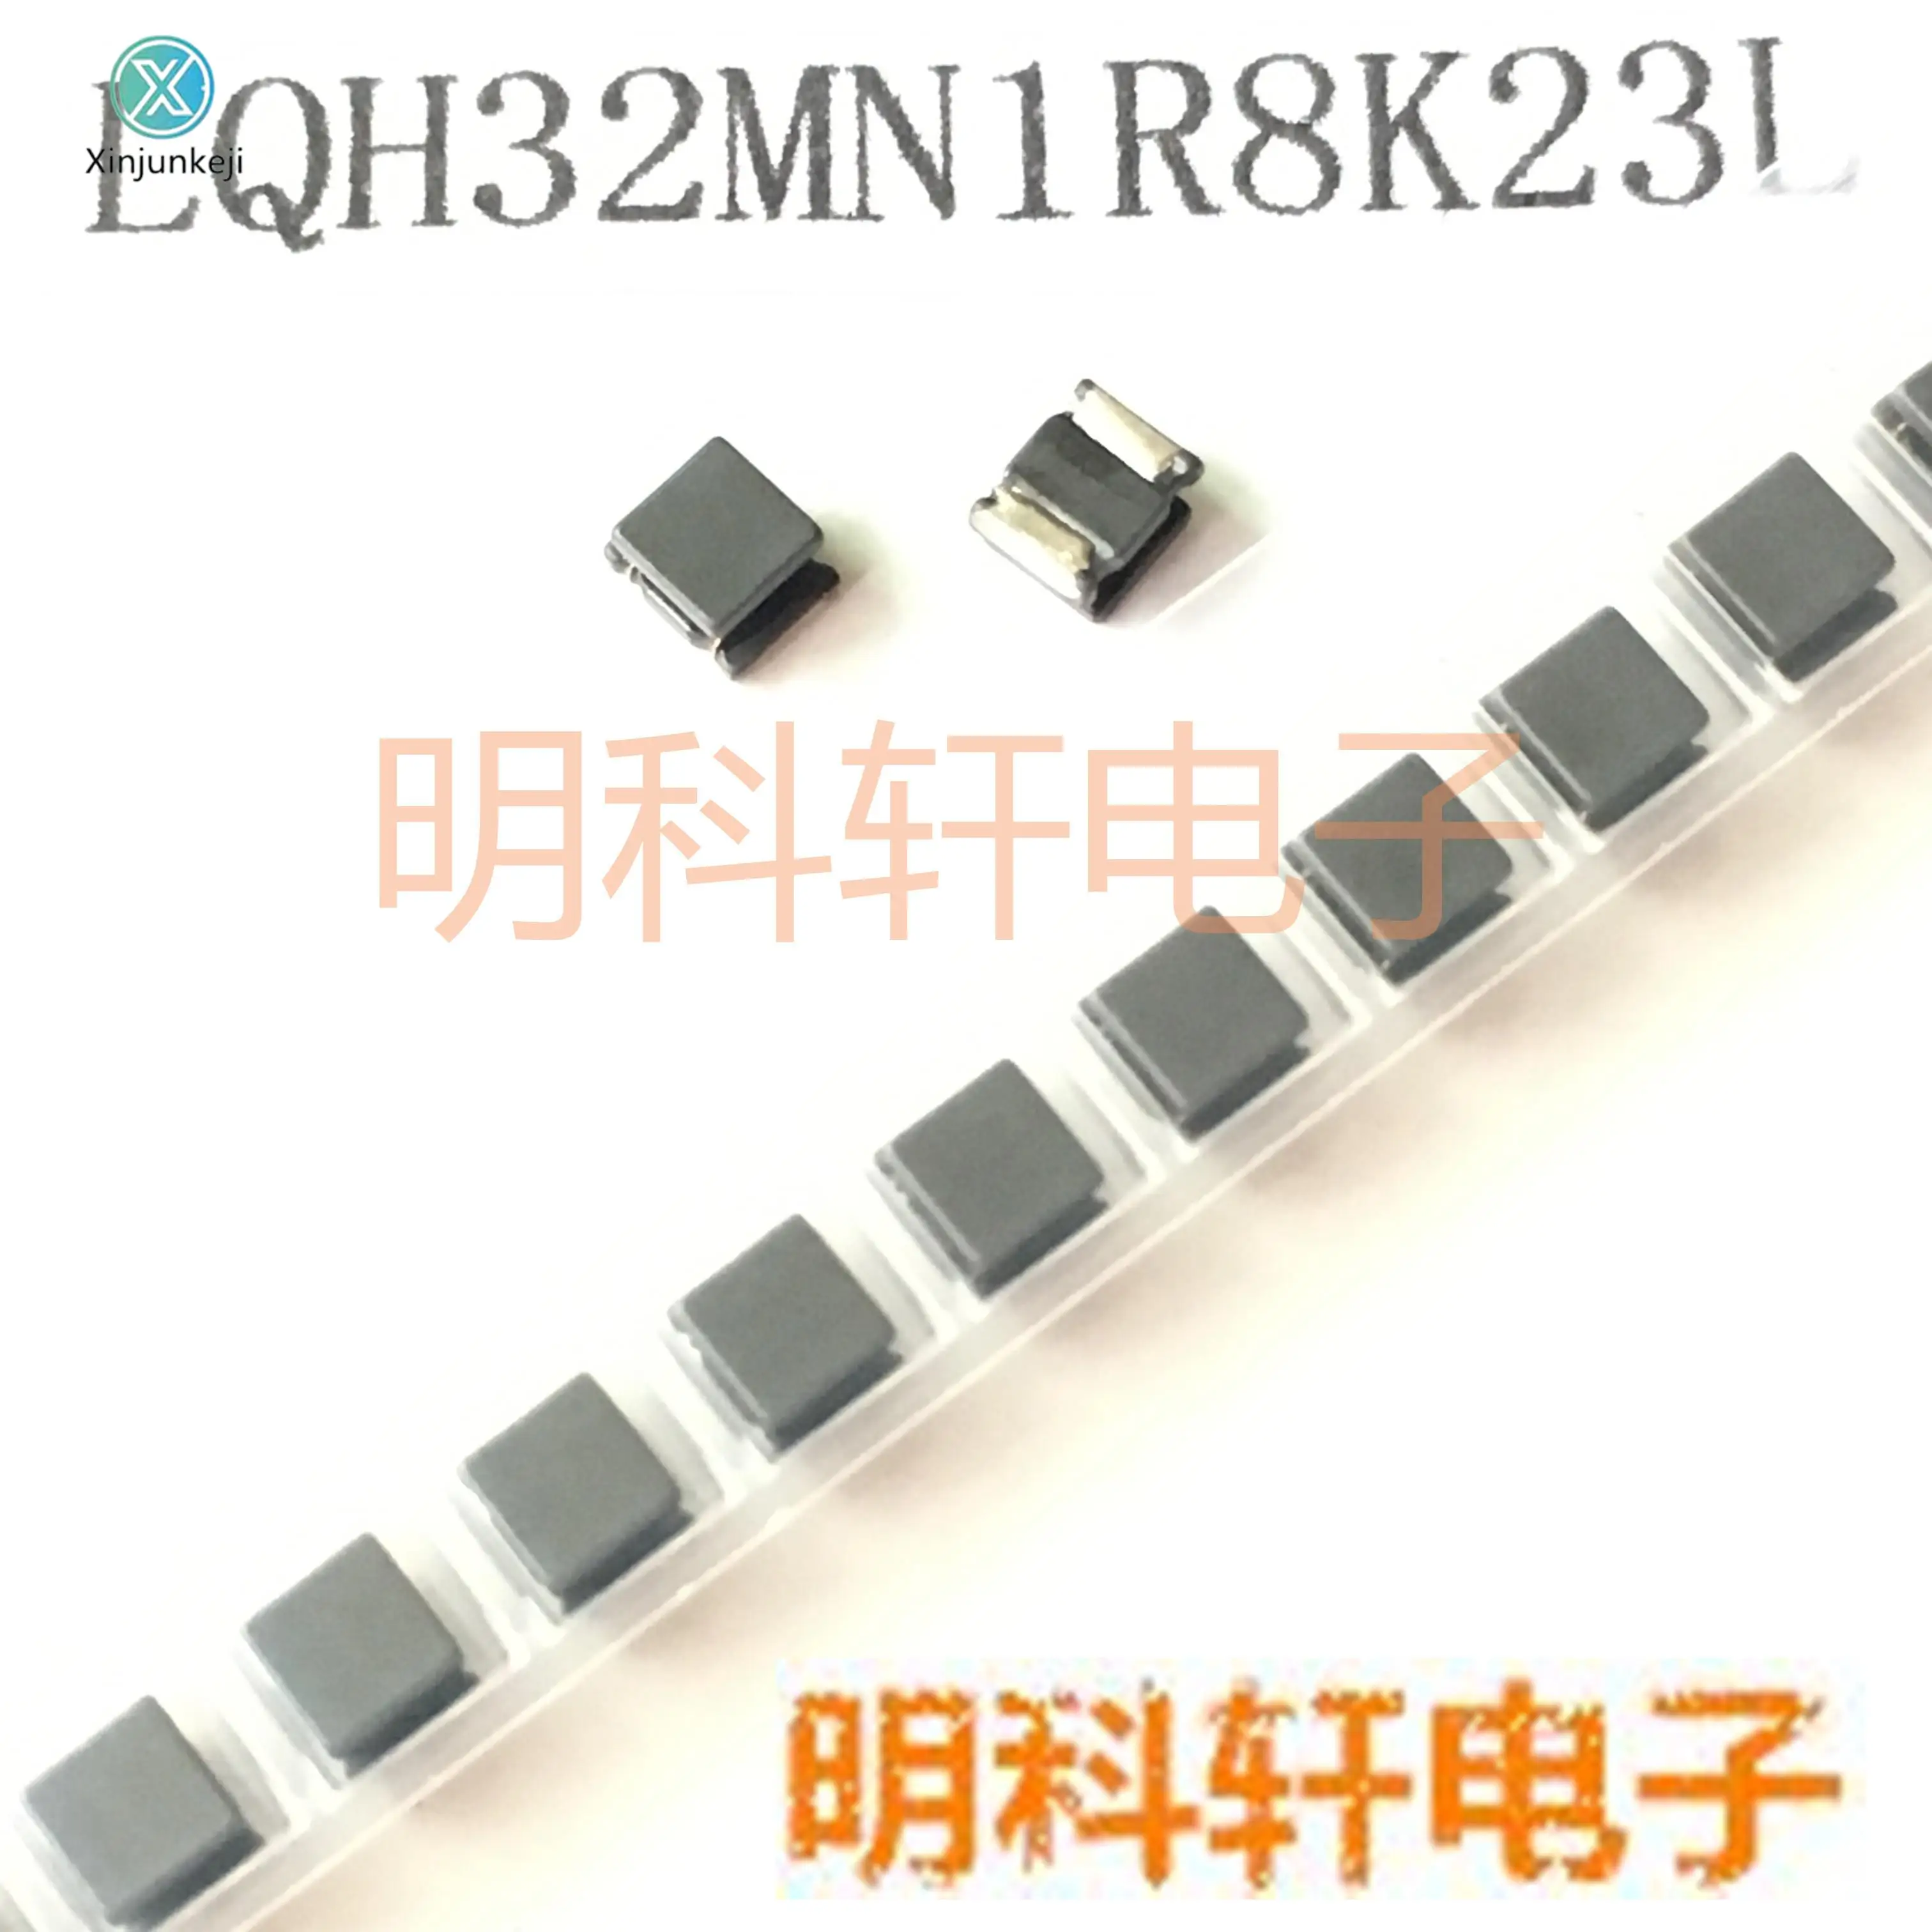 

30pcs orginal new LQH32MN1R8K23L SMD I-shaped wire wound inductor 1210 3225 1.8UH 10% 390mA